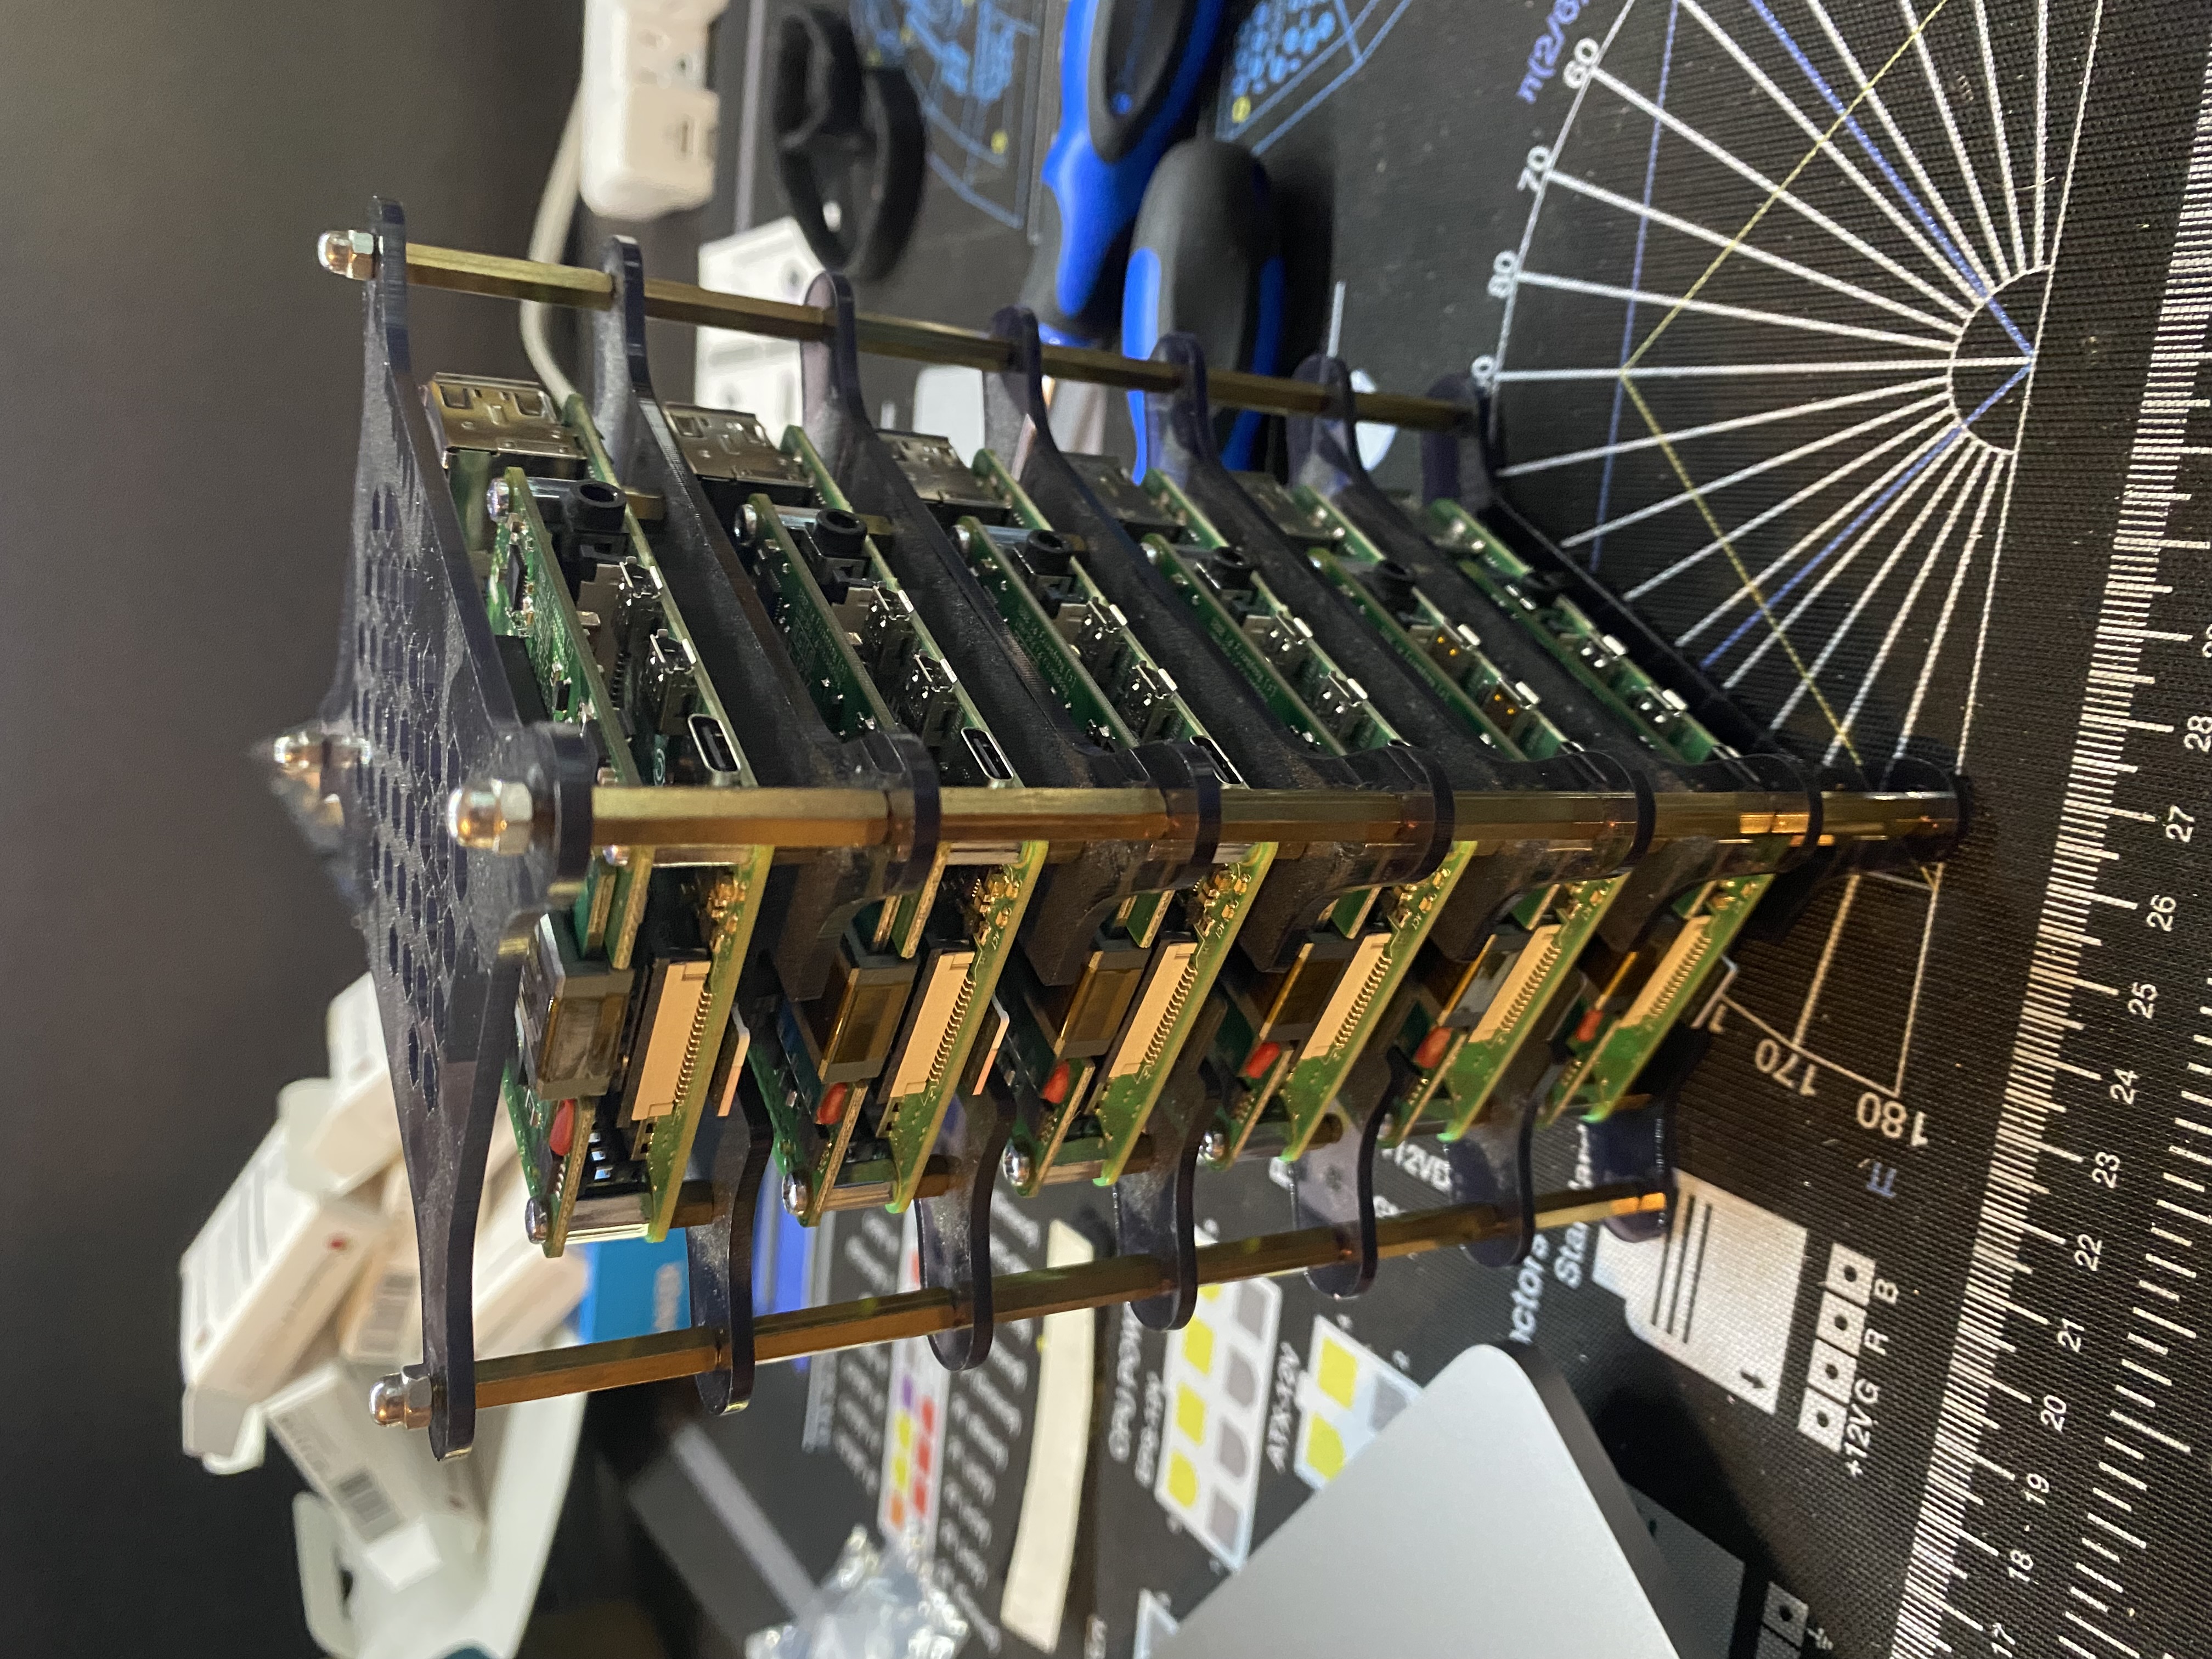 The reassembled Pi cluster, with six Raspberry Pi boards stacked up, each with a PoE HAT.